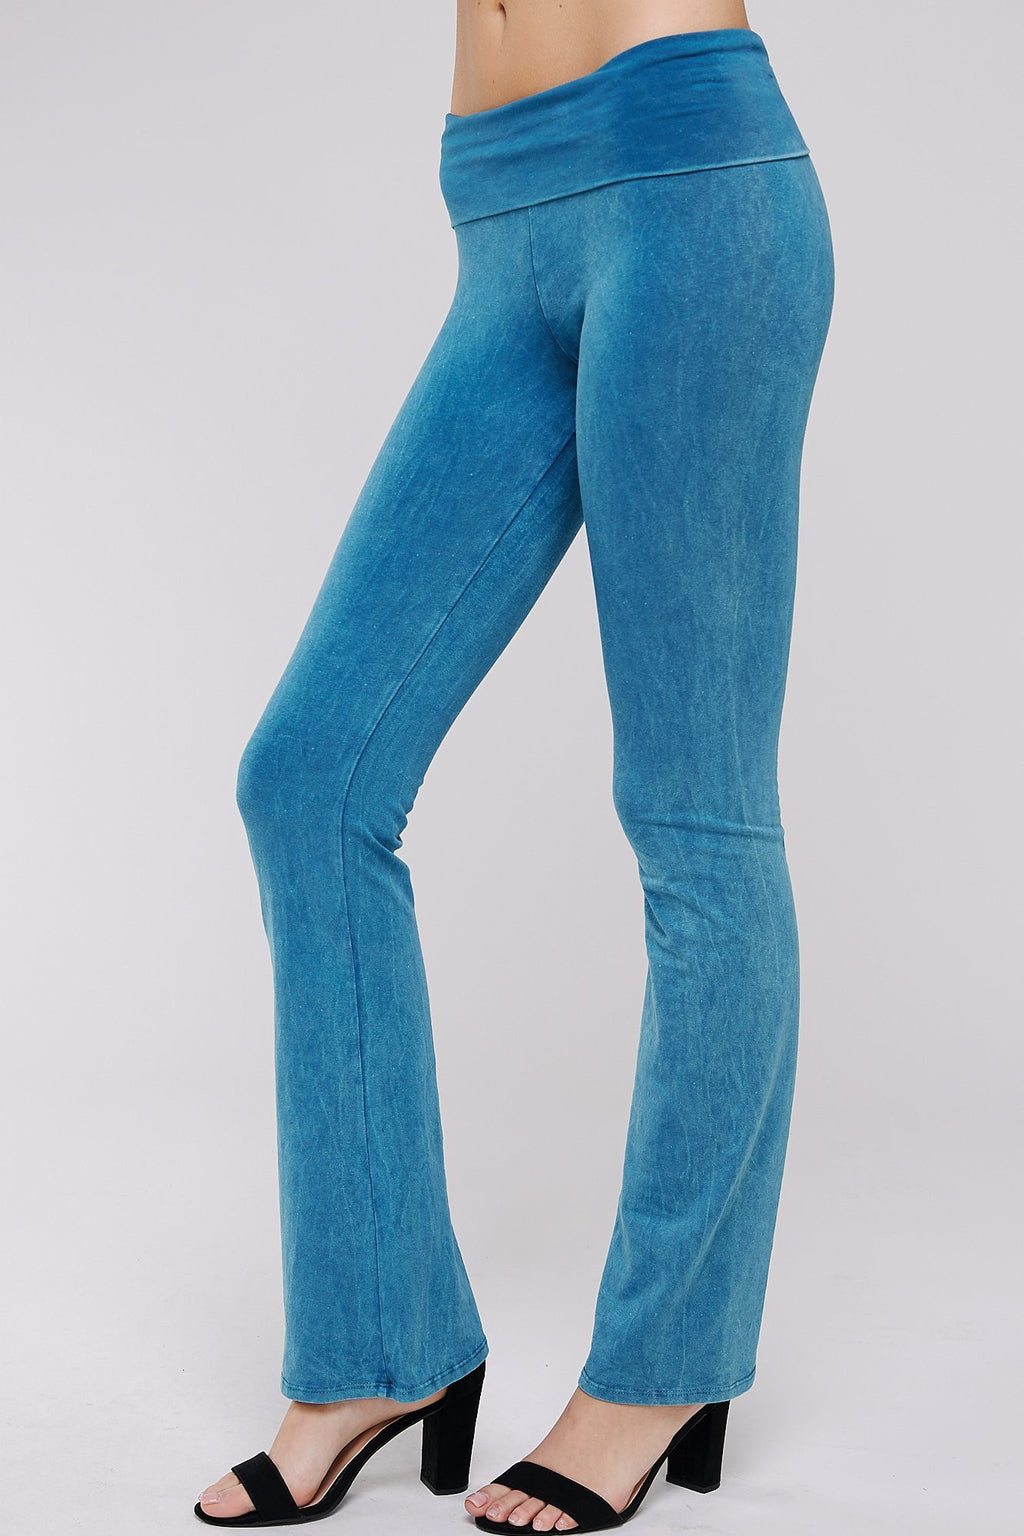 sideways view teal Mineral wash These yoga pants are perfect for any activity.